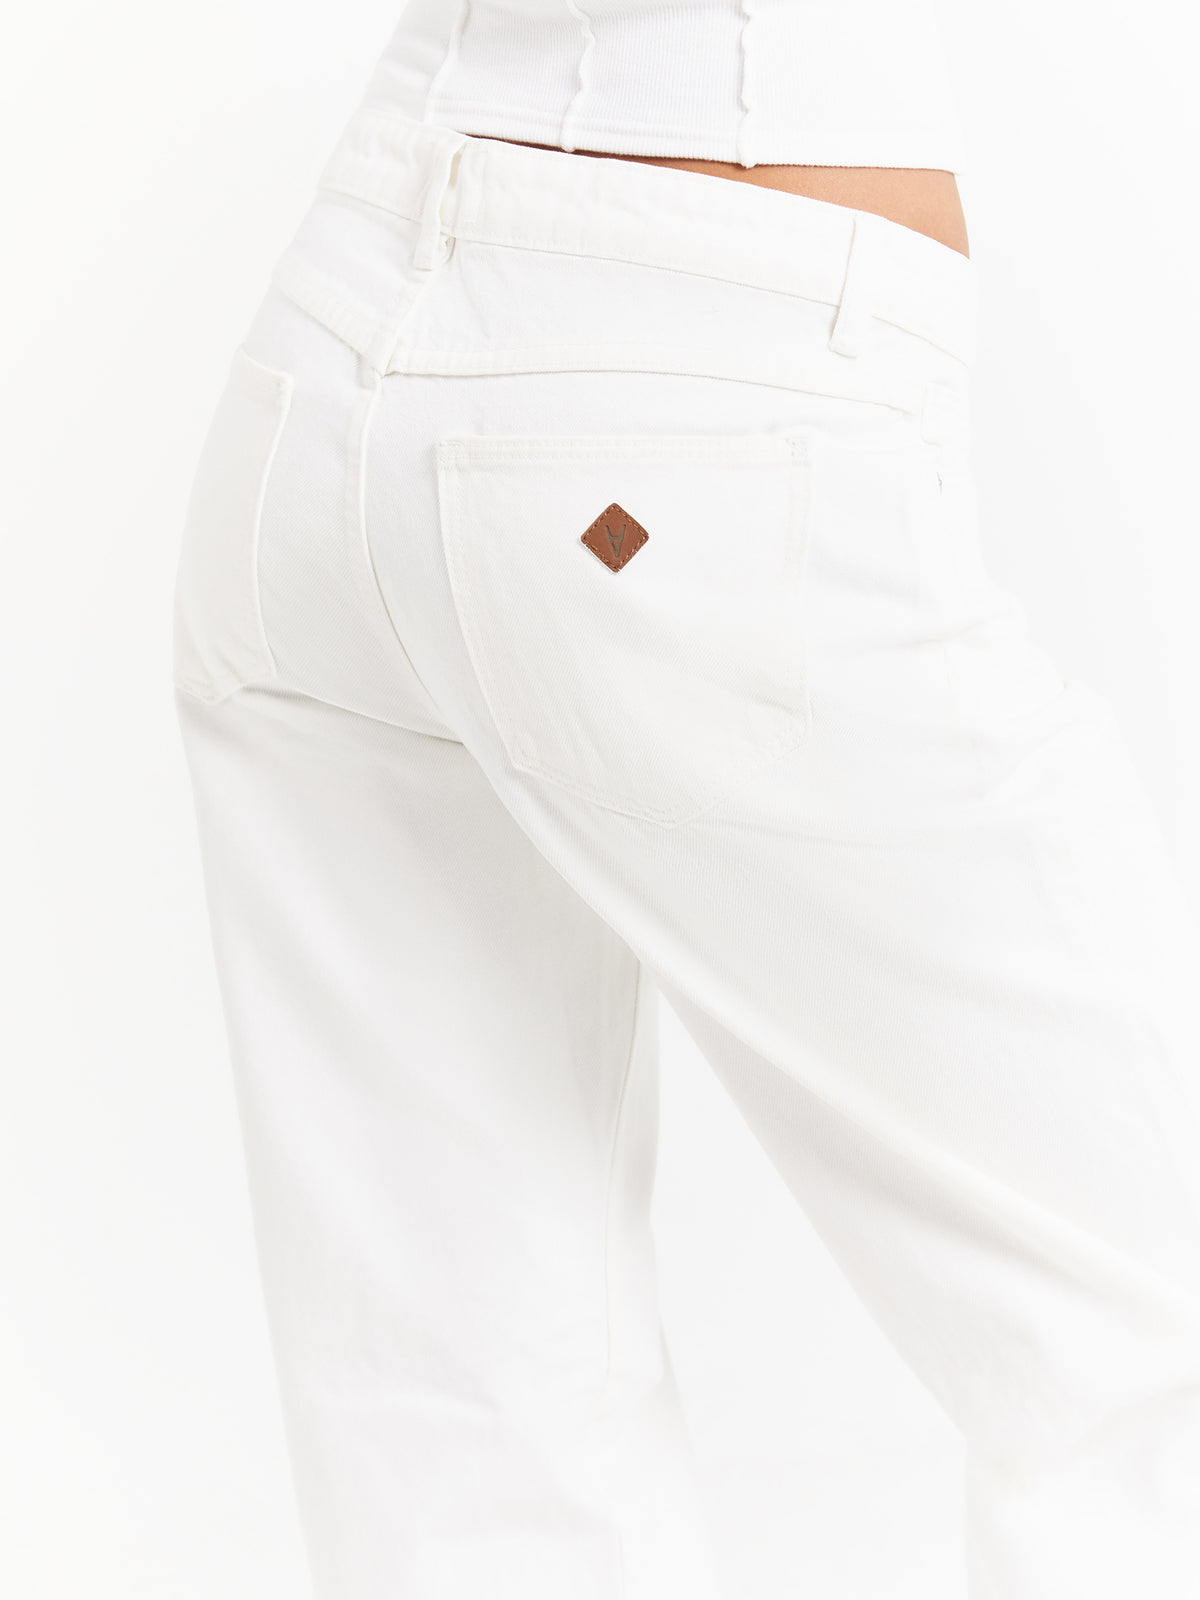 99 Baggy Jeans in Pearl White